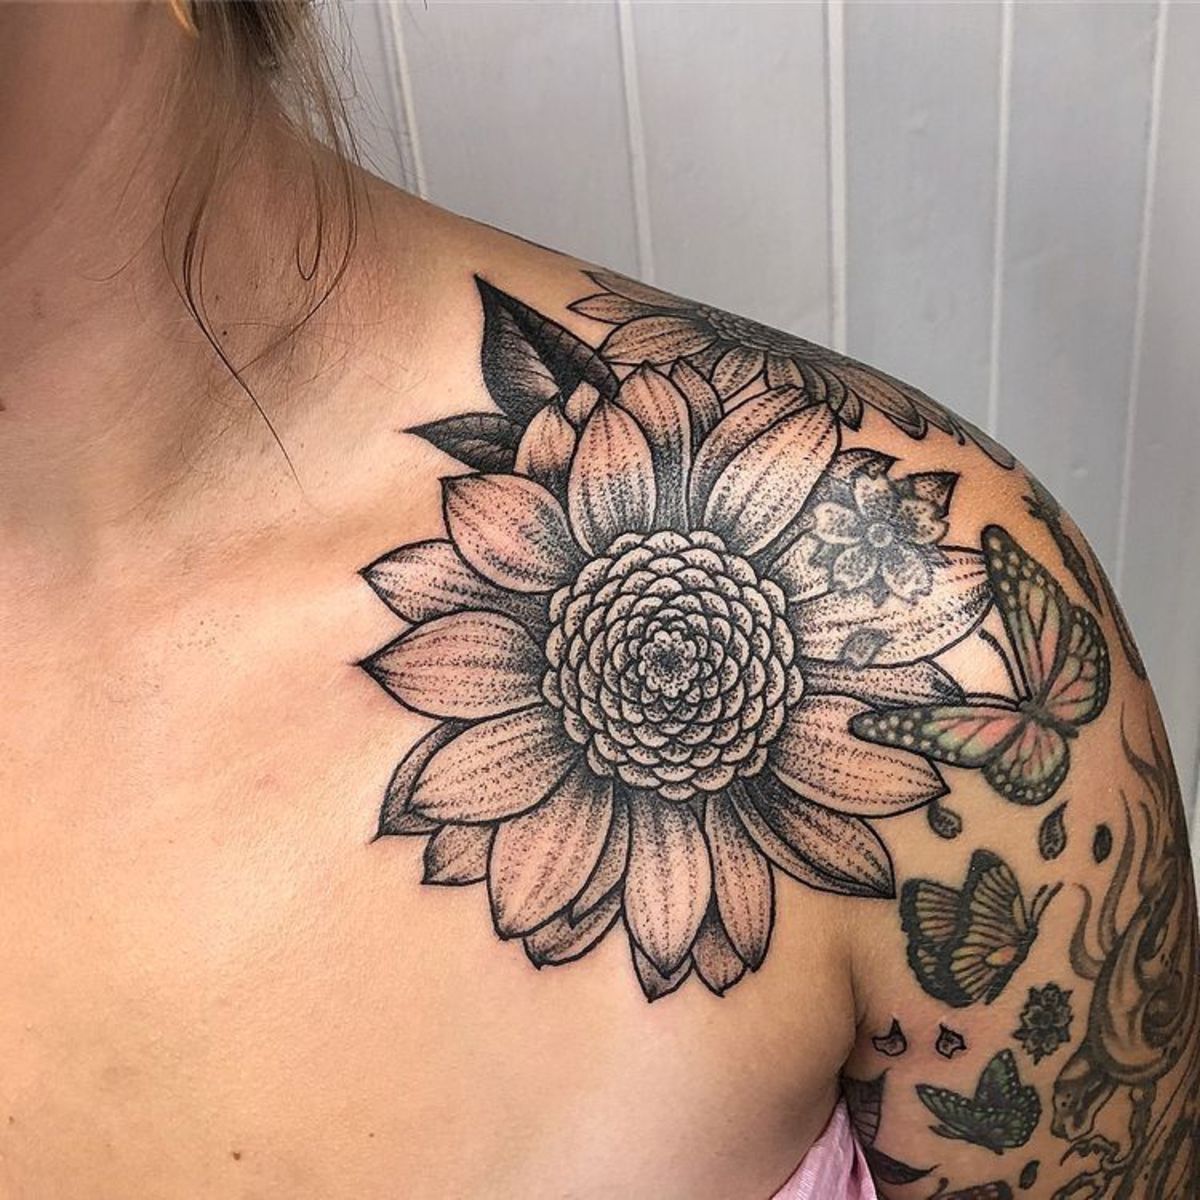 top-sunflower-tattoo-designs-and-ideas